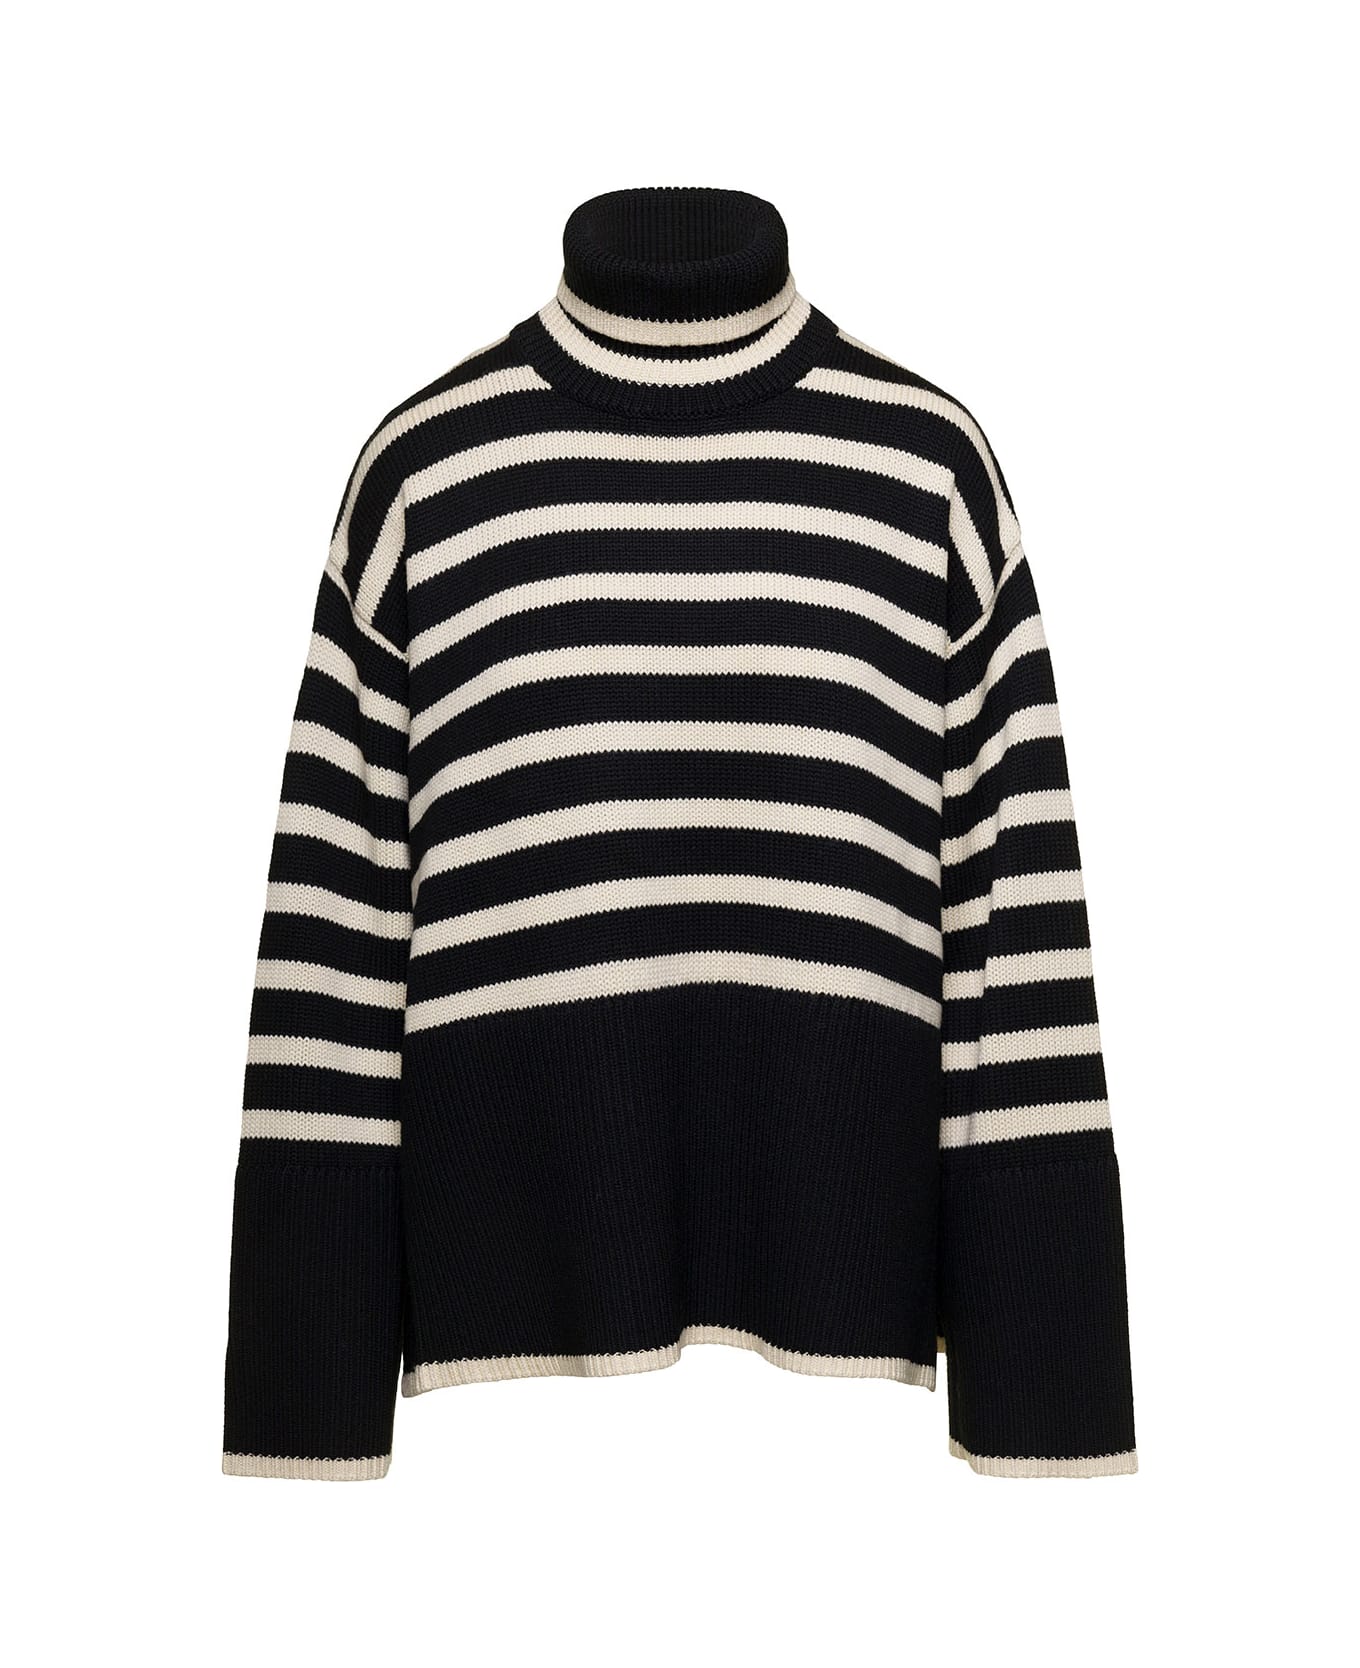 Totême Black And White Sweater With Striped Motif In Wool Woman - Black